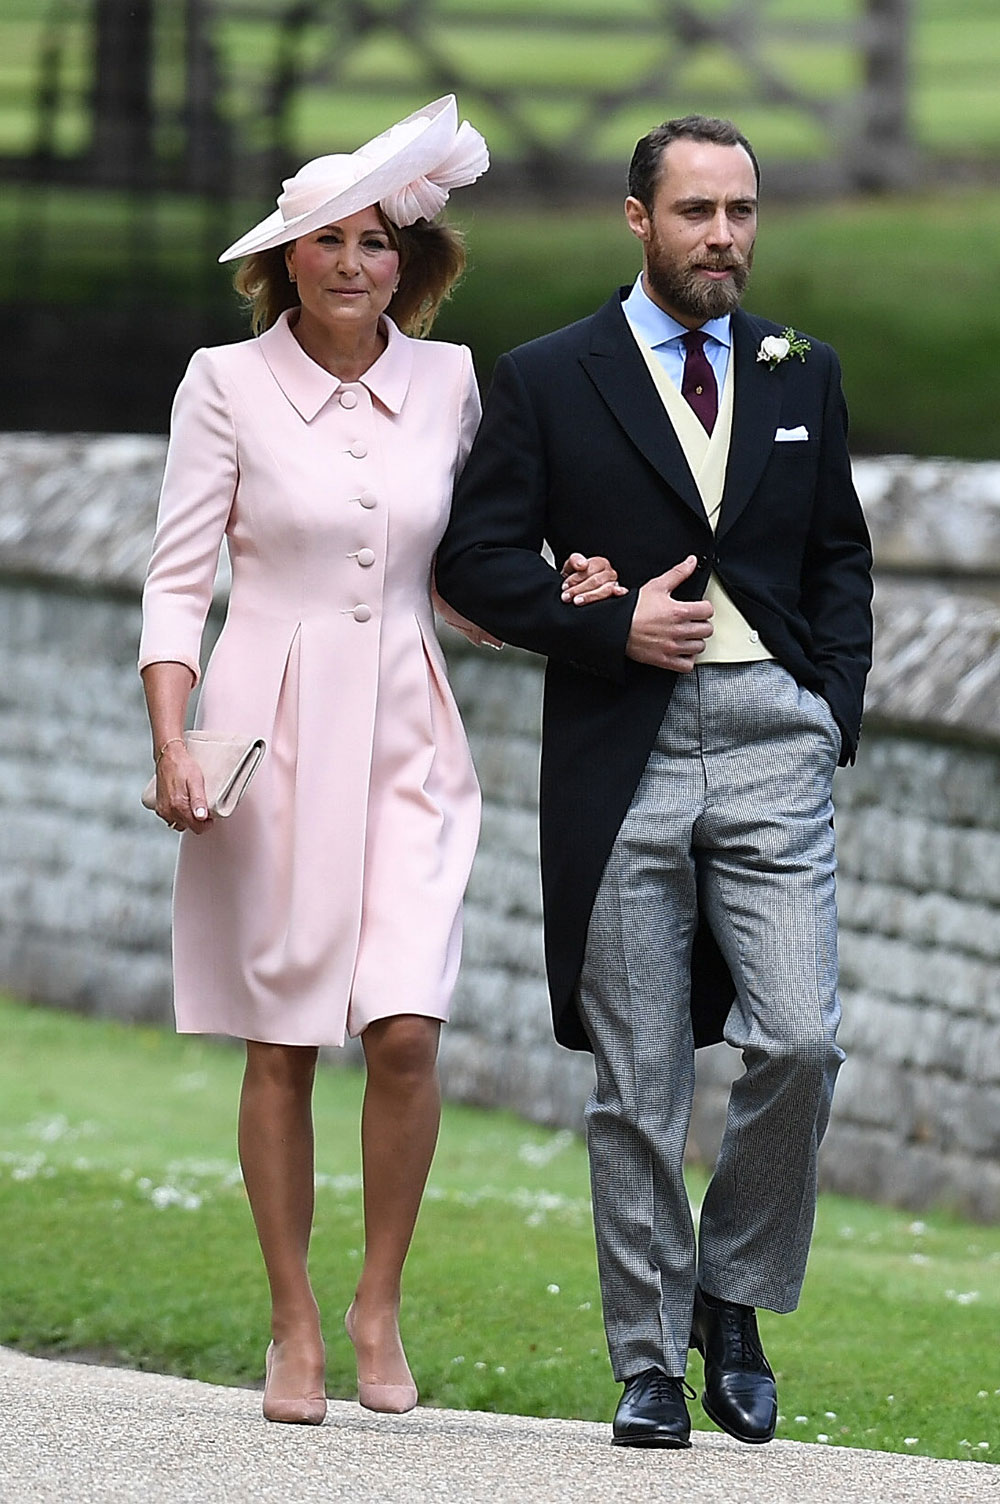 Pippa's mother, Carole Middleton, arrives on the arm of her son James Middleton.